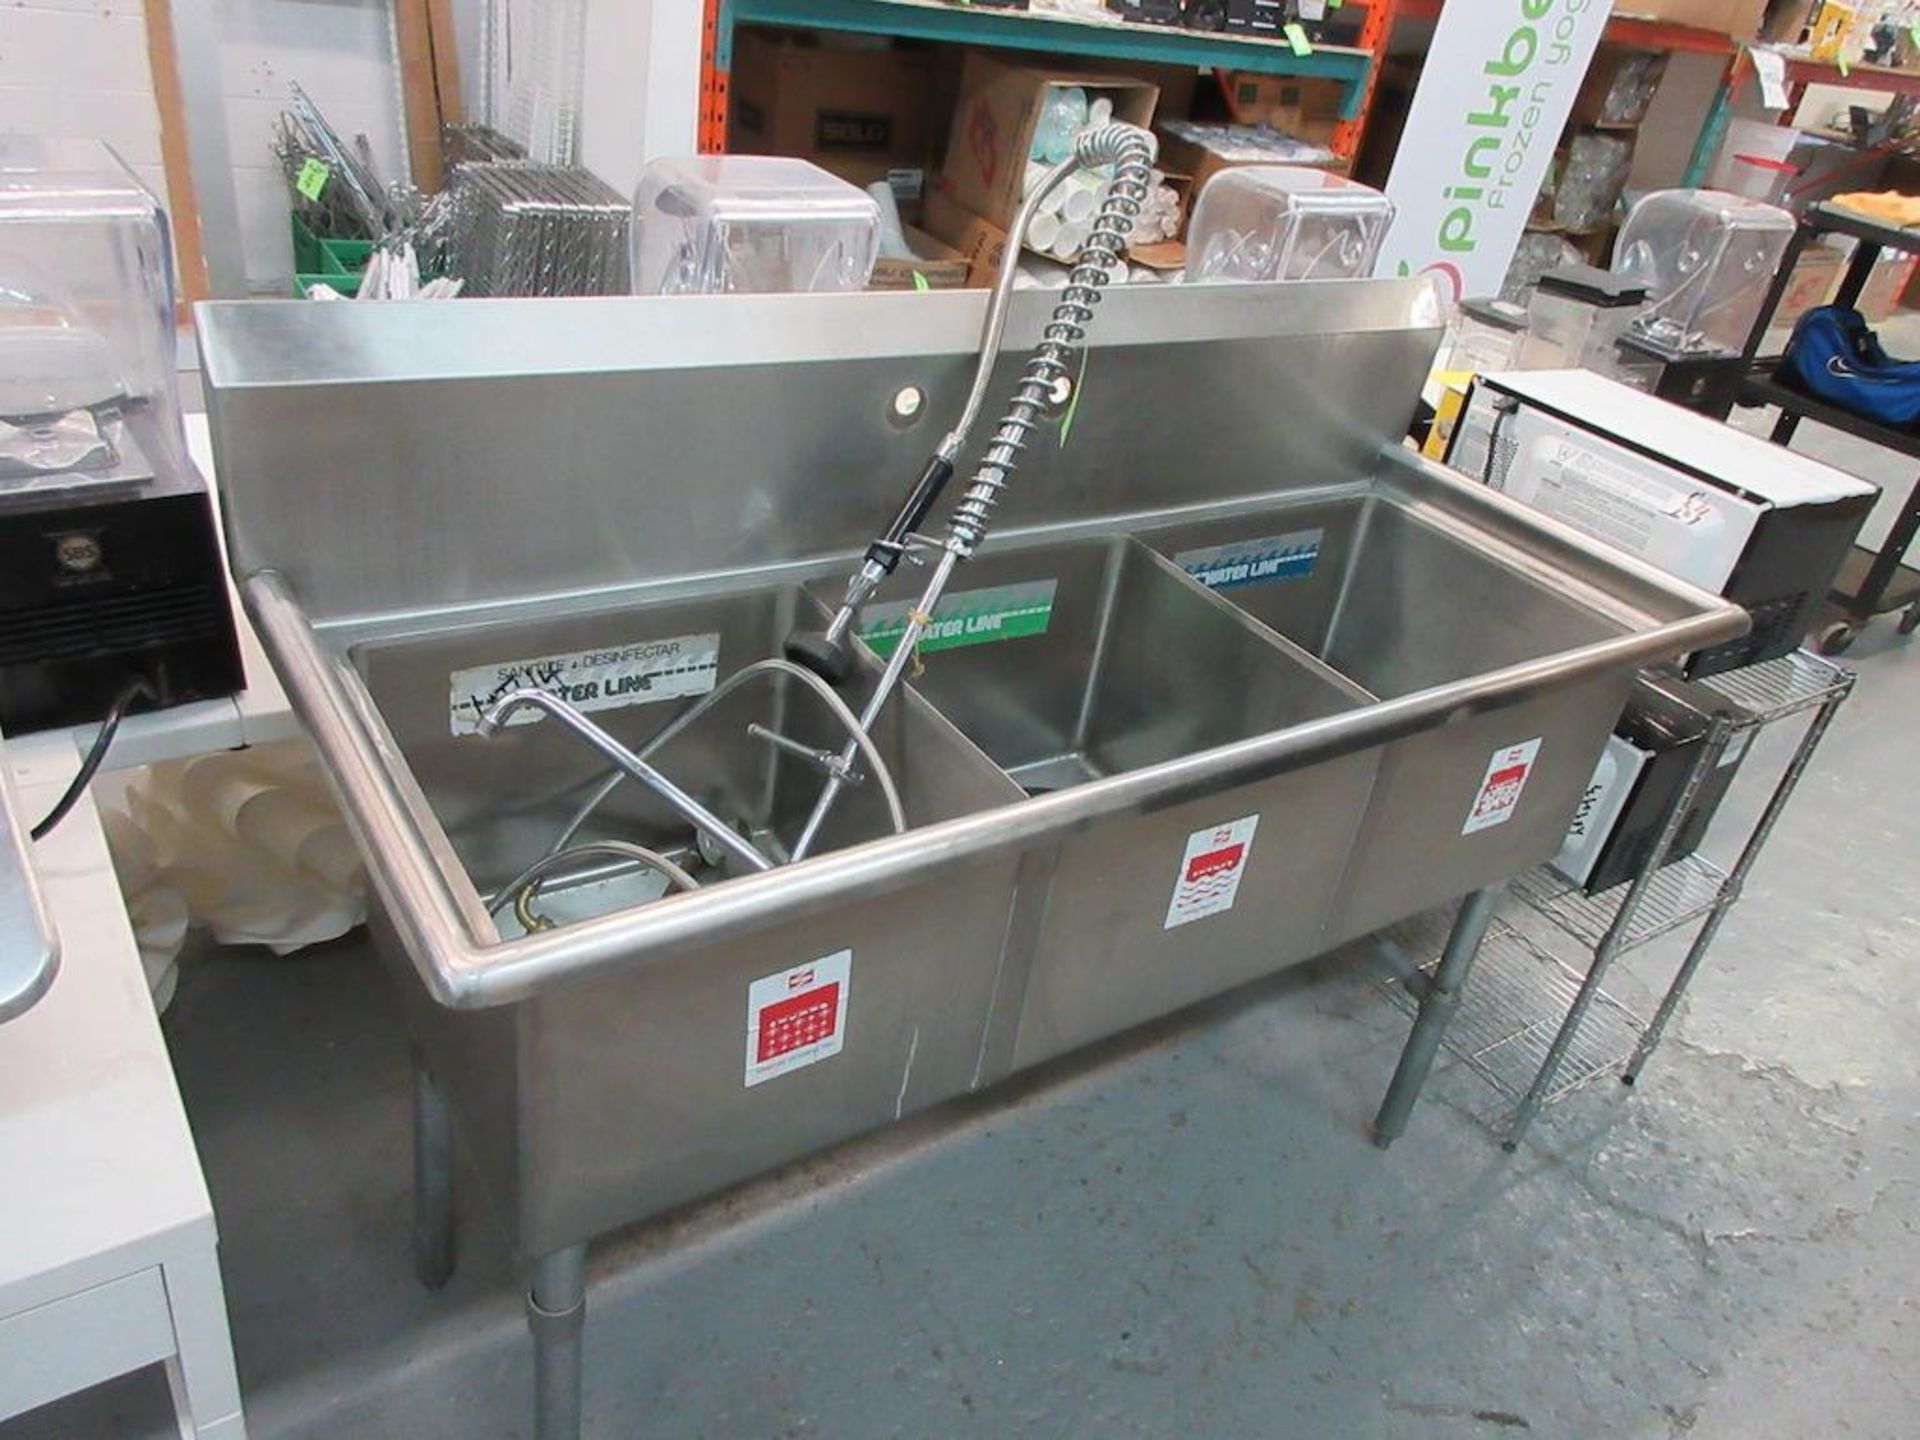 Stainless Steel 59" 3 compartment sink w water filter